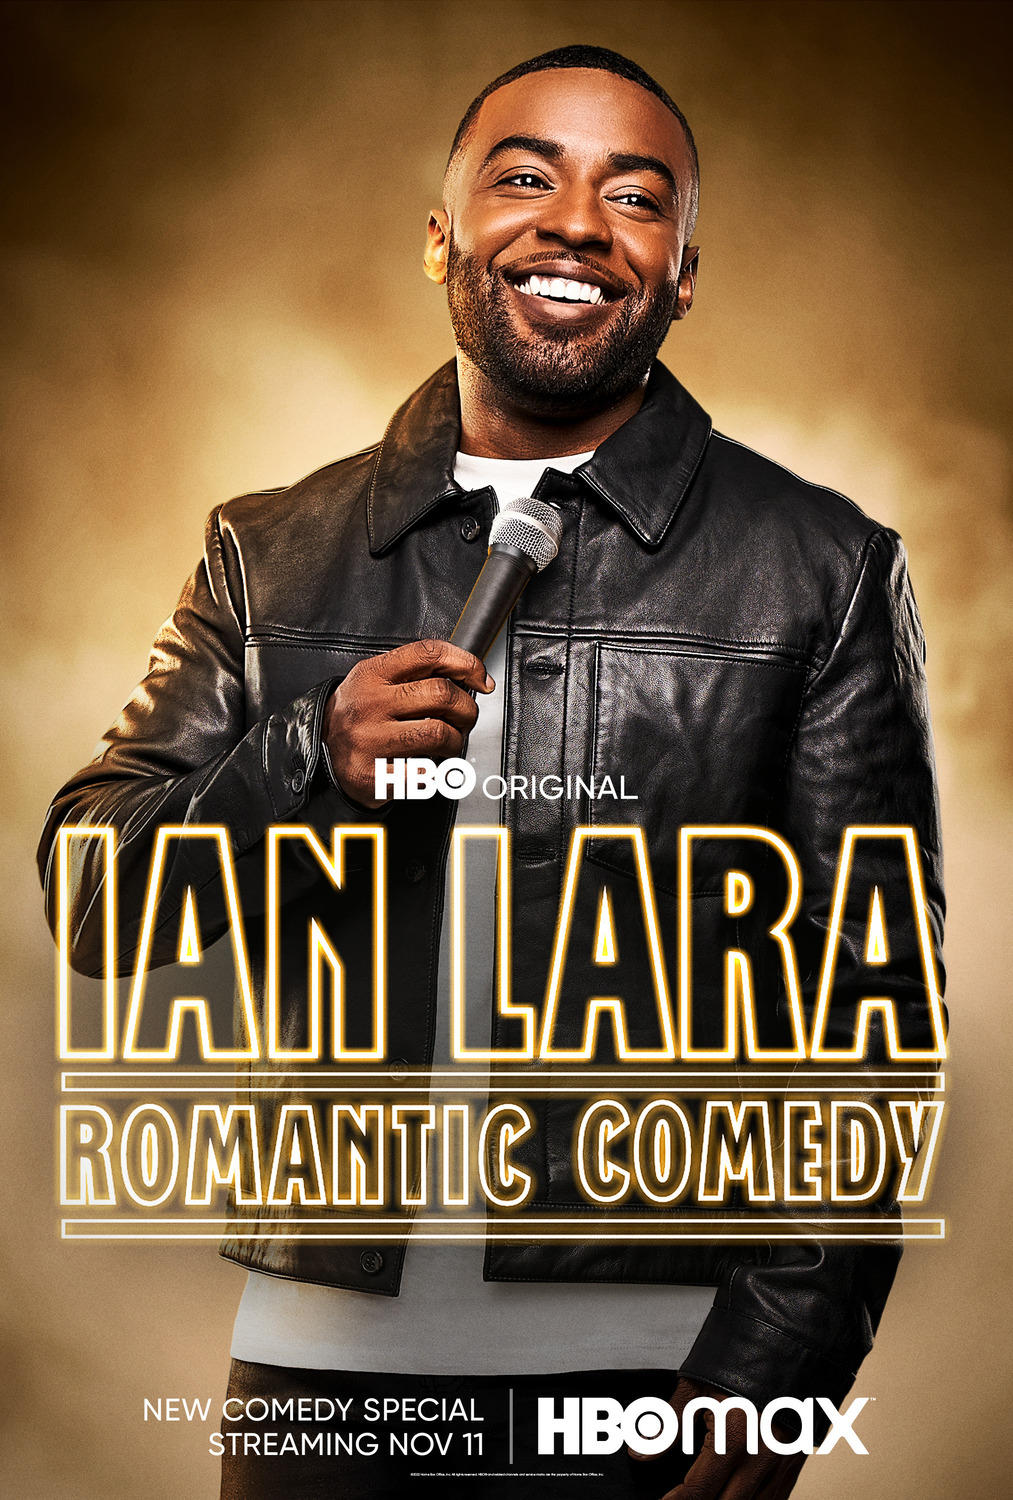 Extra Large TV Poster Image for Ian Lara: Romantic Comedy 